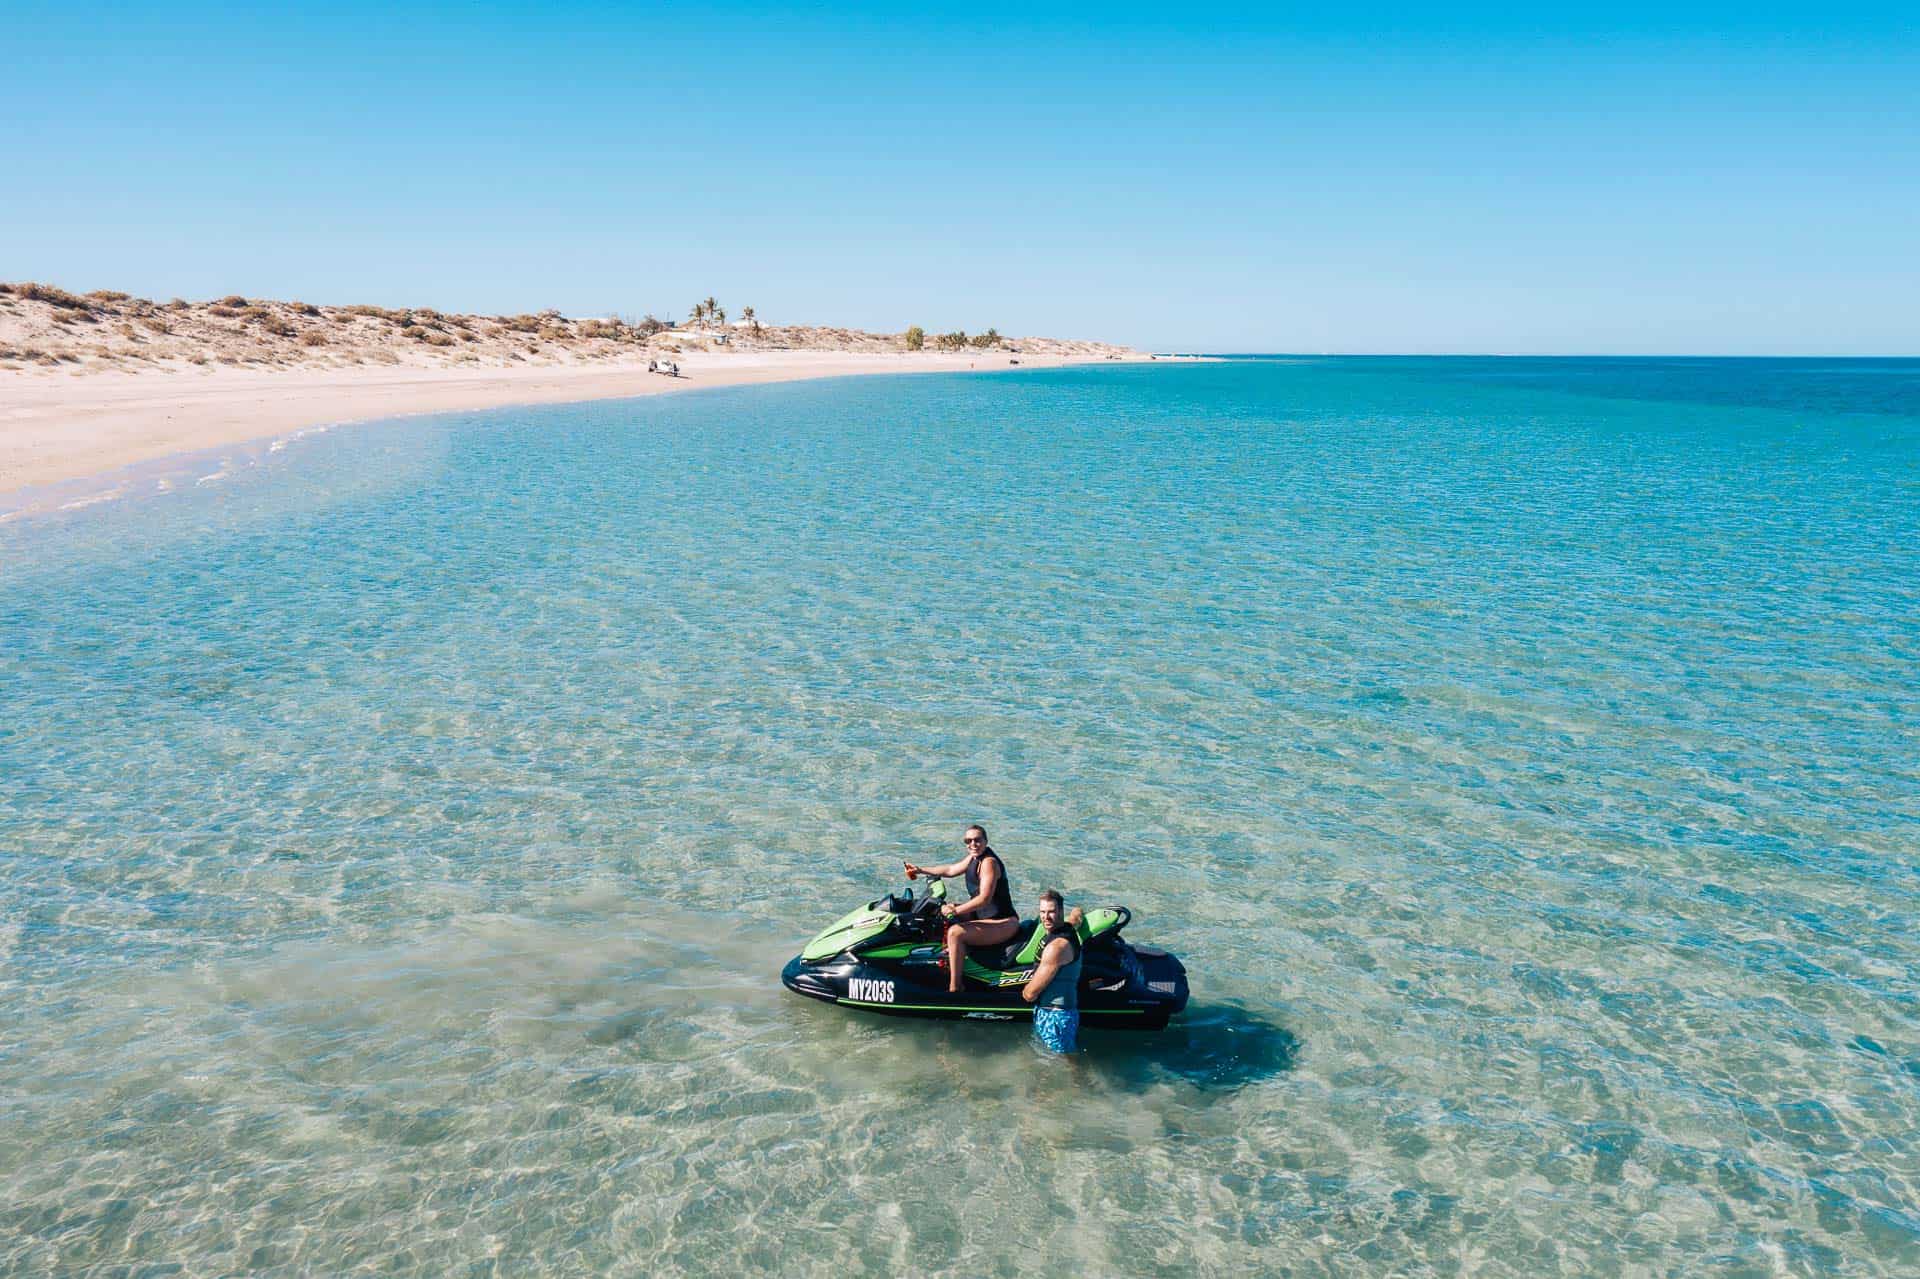 town beach exmouth, things to do in exmouth, exmouth western australia, what to do in exmouth, exmouth things to do